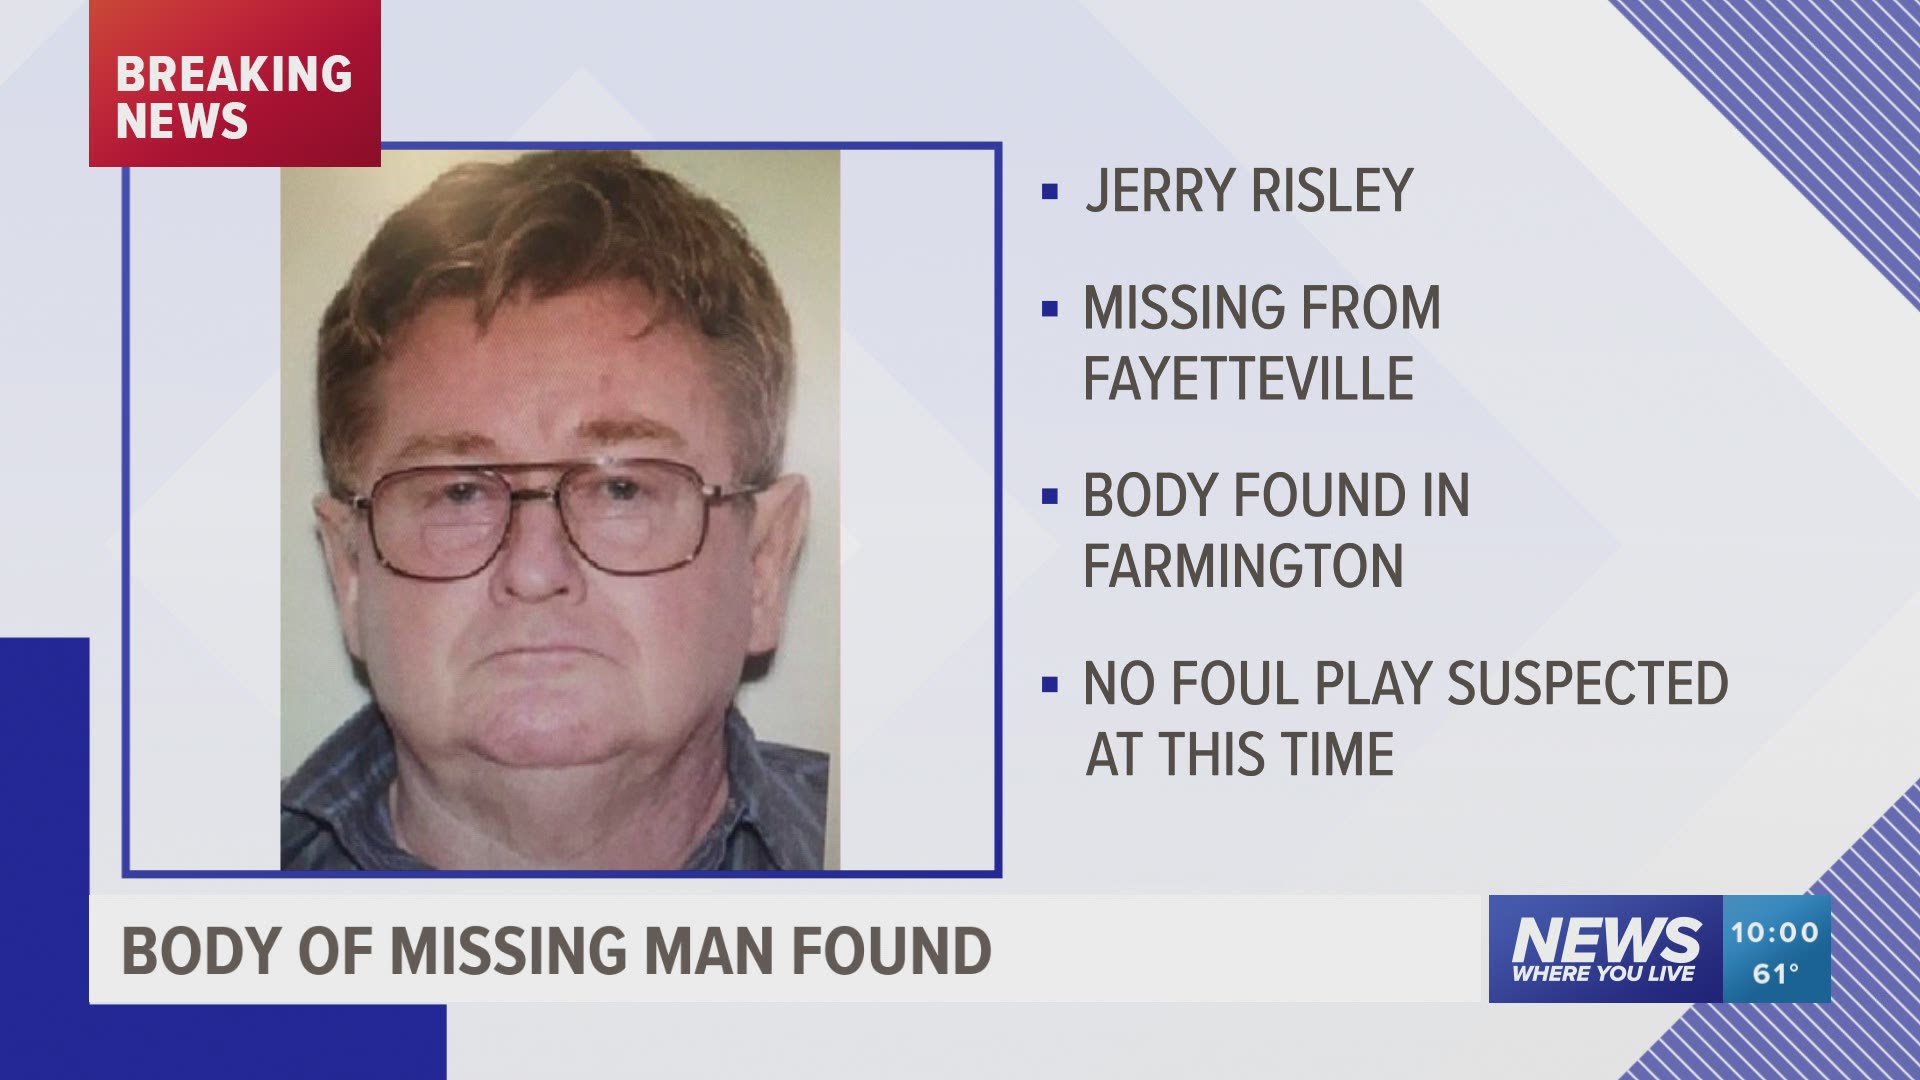 Police have located the body of a missing Fayetteville man last seen leaving the Washington Regional Medical Center on May 13.